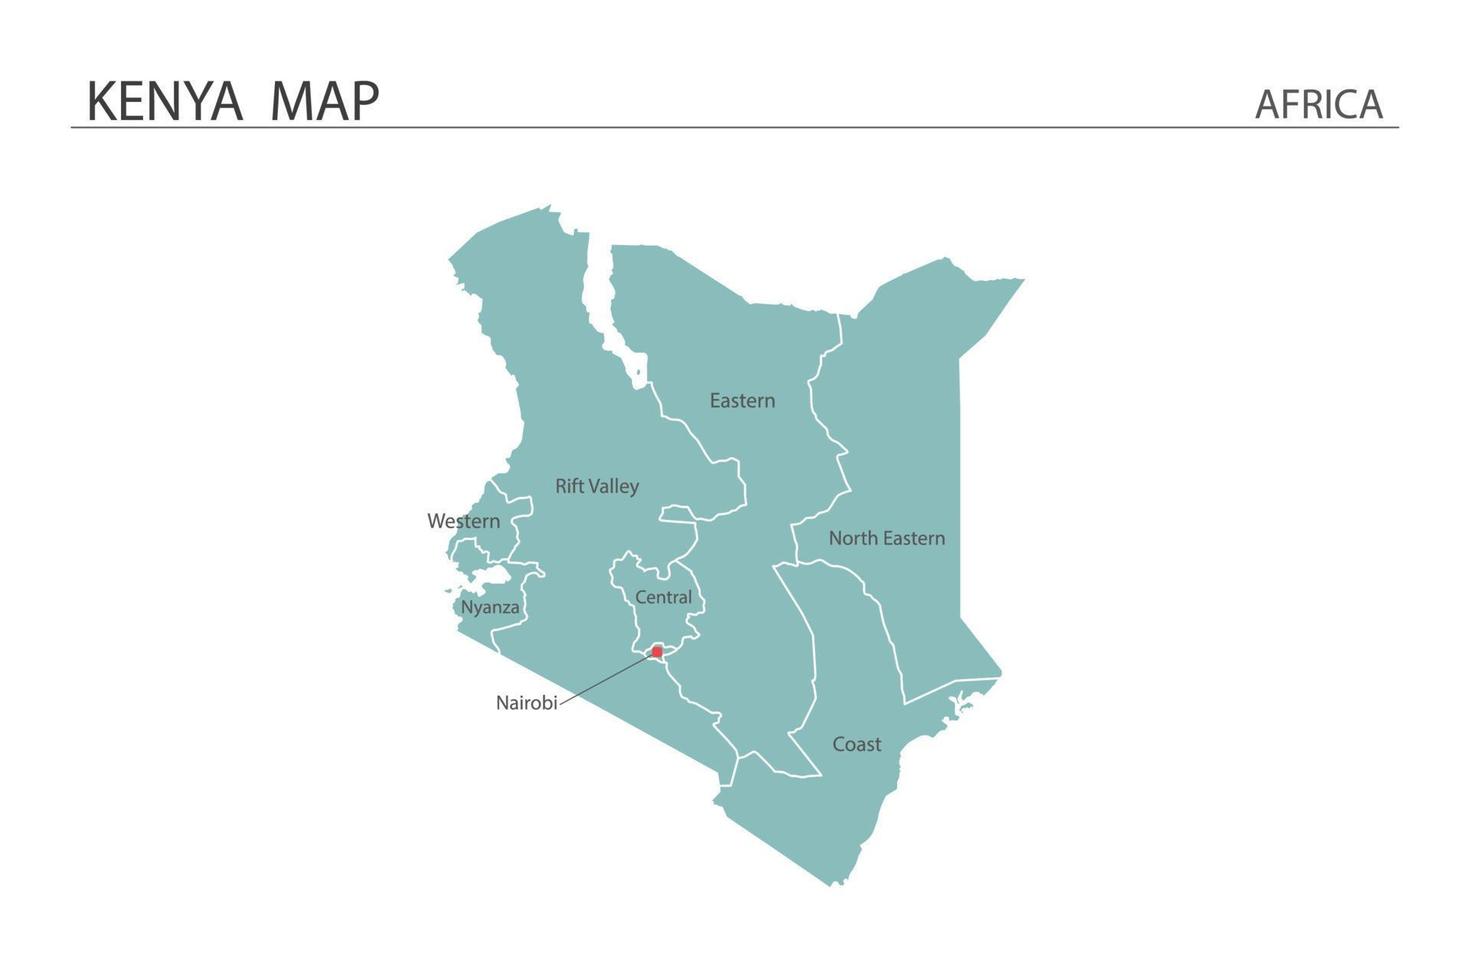 Kenya map vector illustration on white background. Map have all province and mark the capital city of Kenya.